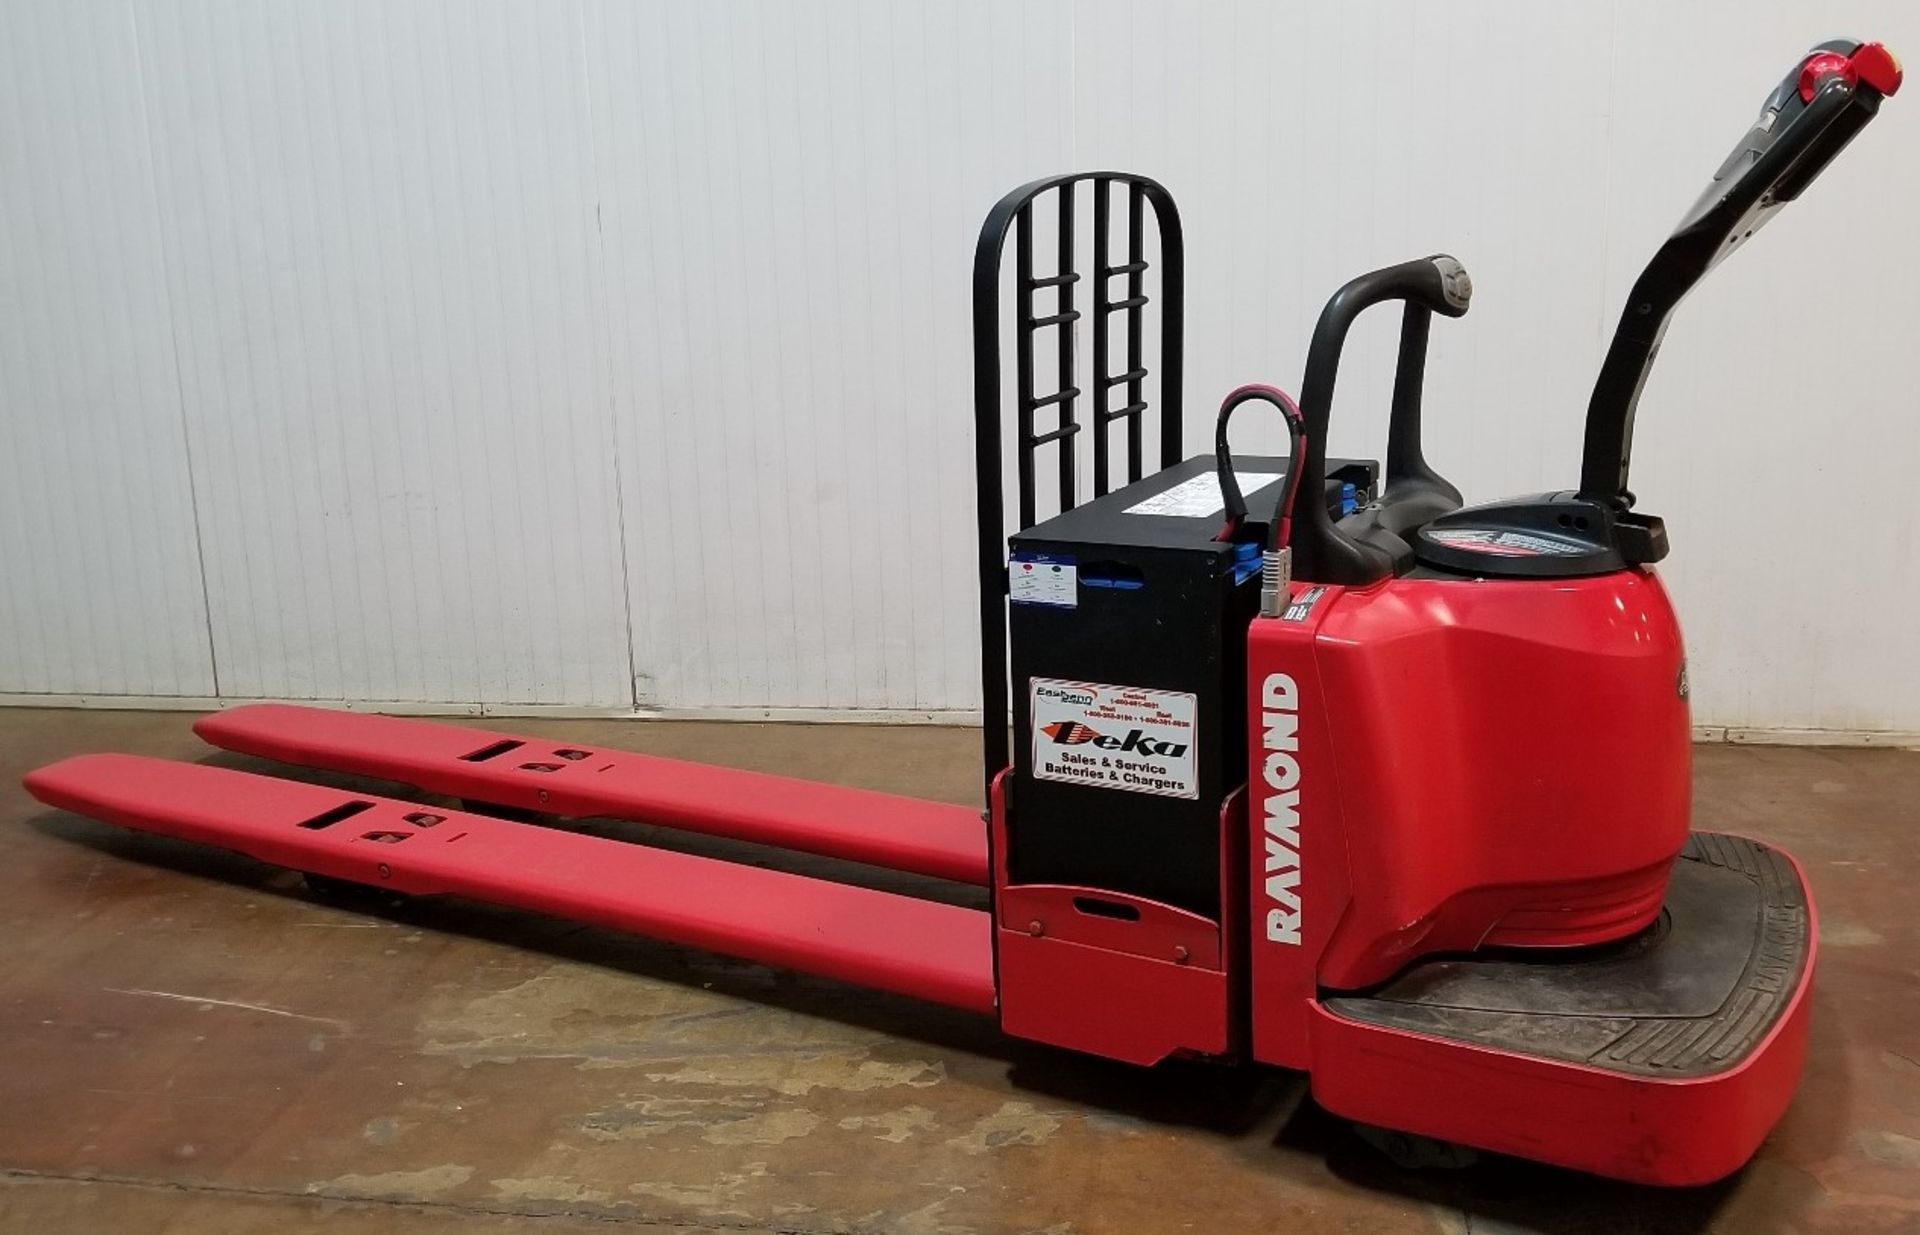 RAYMOND (2009) 8400 24V ELECTRIC RIDEON PALLET JACK WITH 6000 LB. CAPACITY, S/N: 840-09-83857 (